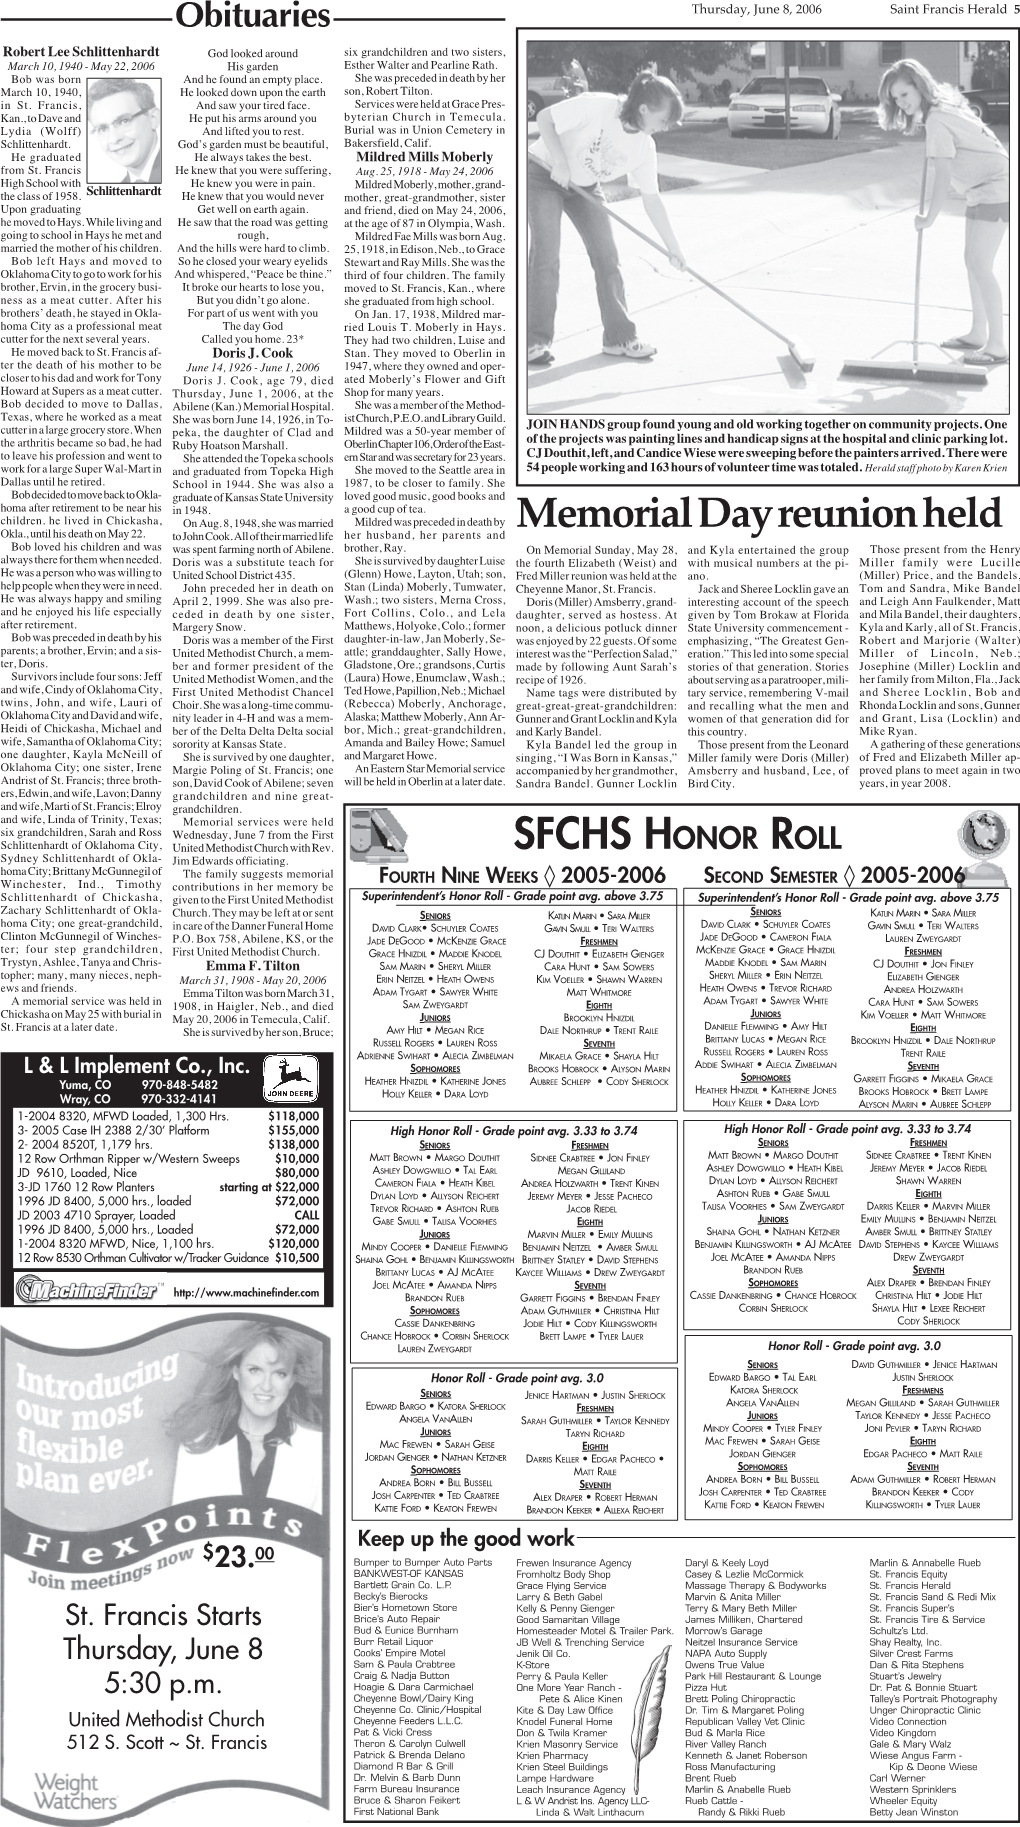 SFCHS HONOR ROLL Memorial Day Reunion Held